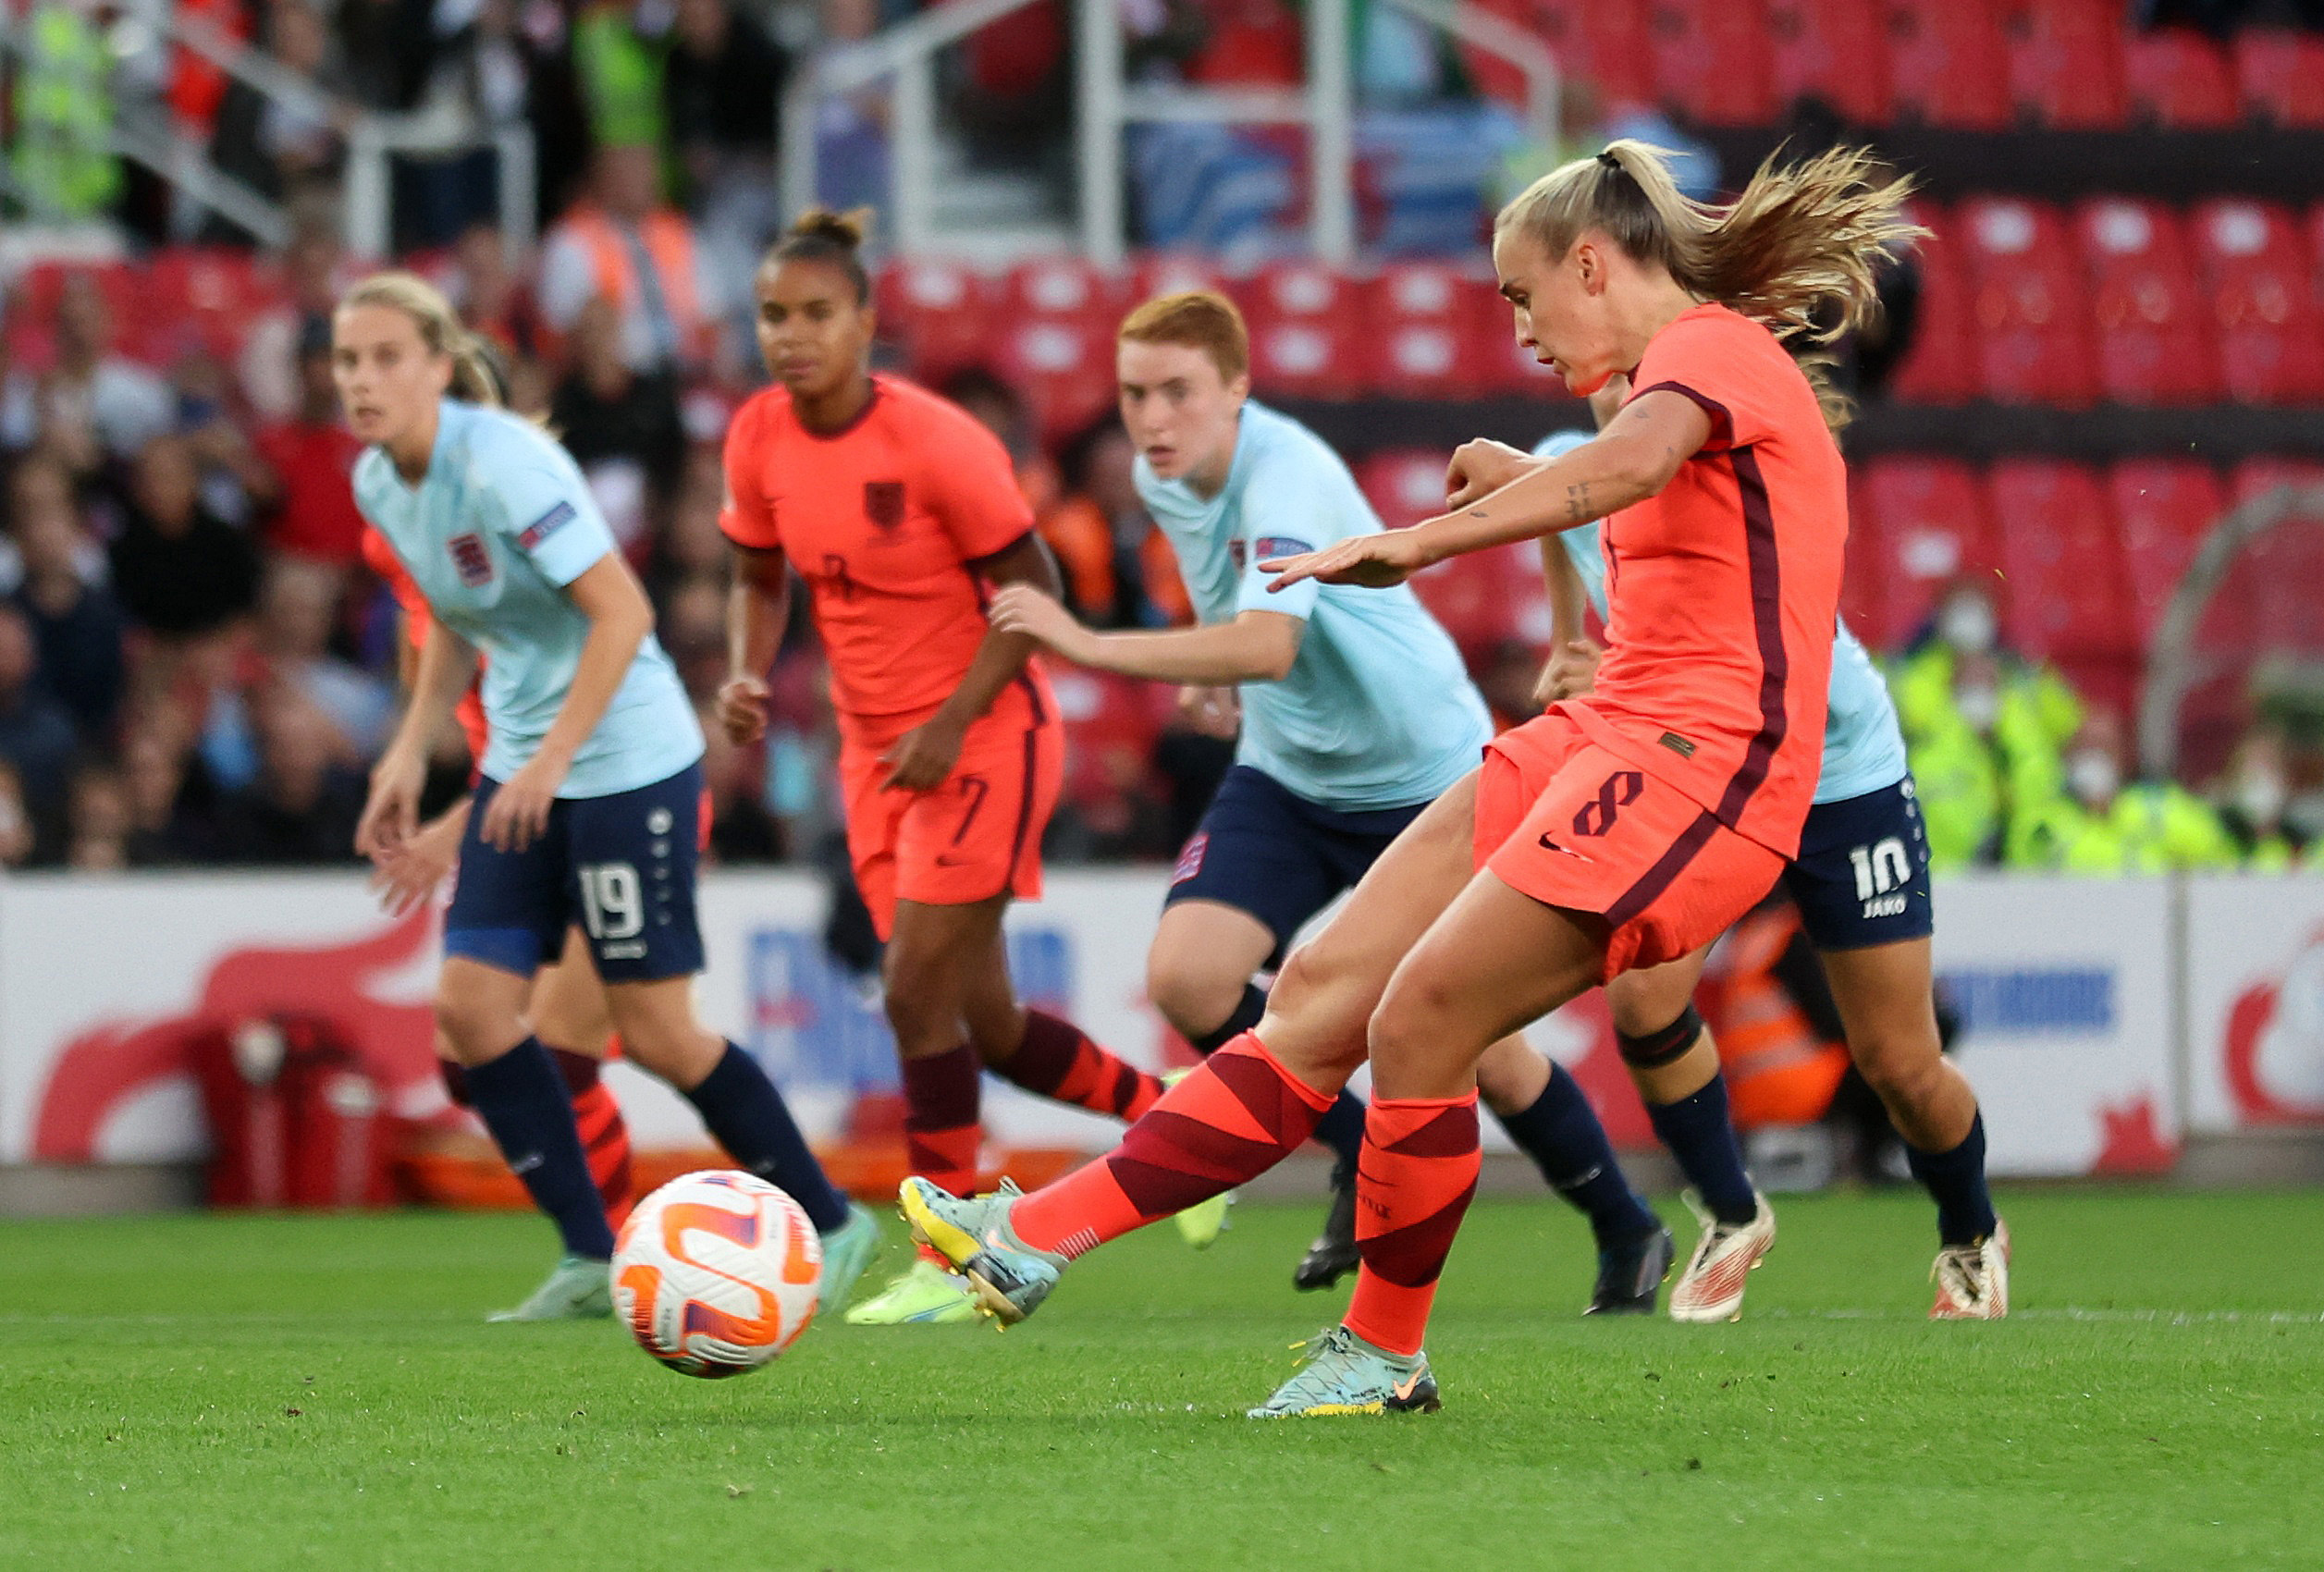 England Women wrap up World Cup qualifiers with 80 goals scored and